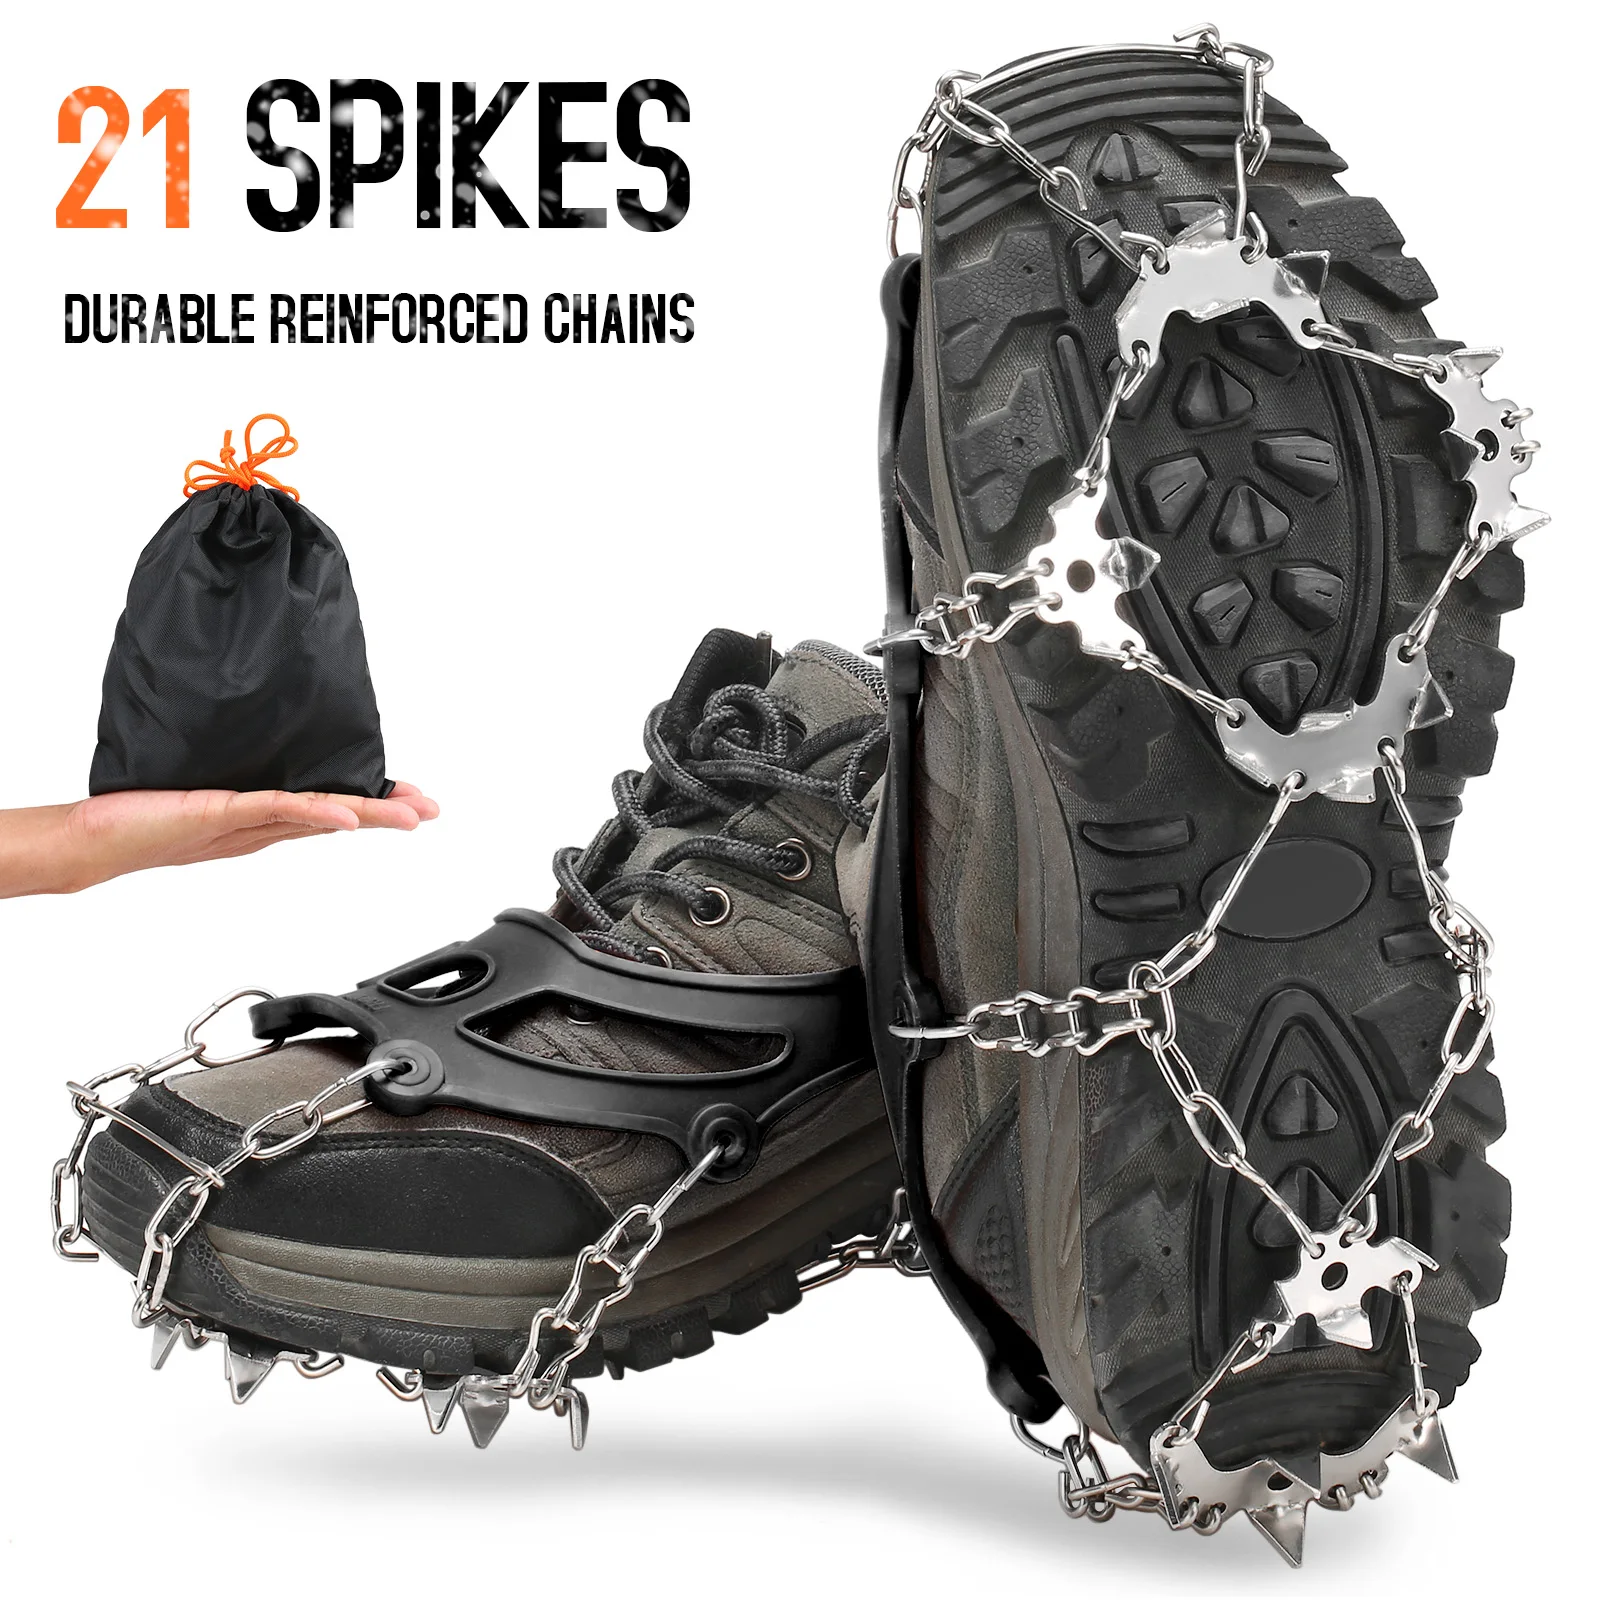 

Snow Non Slip Climbing Crampons Cleats Shoe Cover Ice Gripper 21 Spikes Hiking Winter Manganese Steel Outdoor Cleats Overshoes